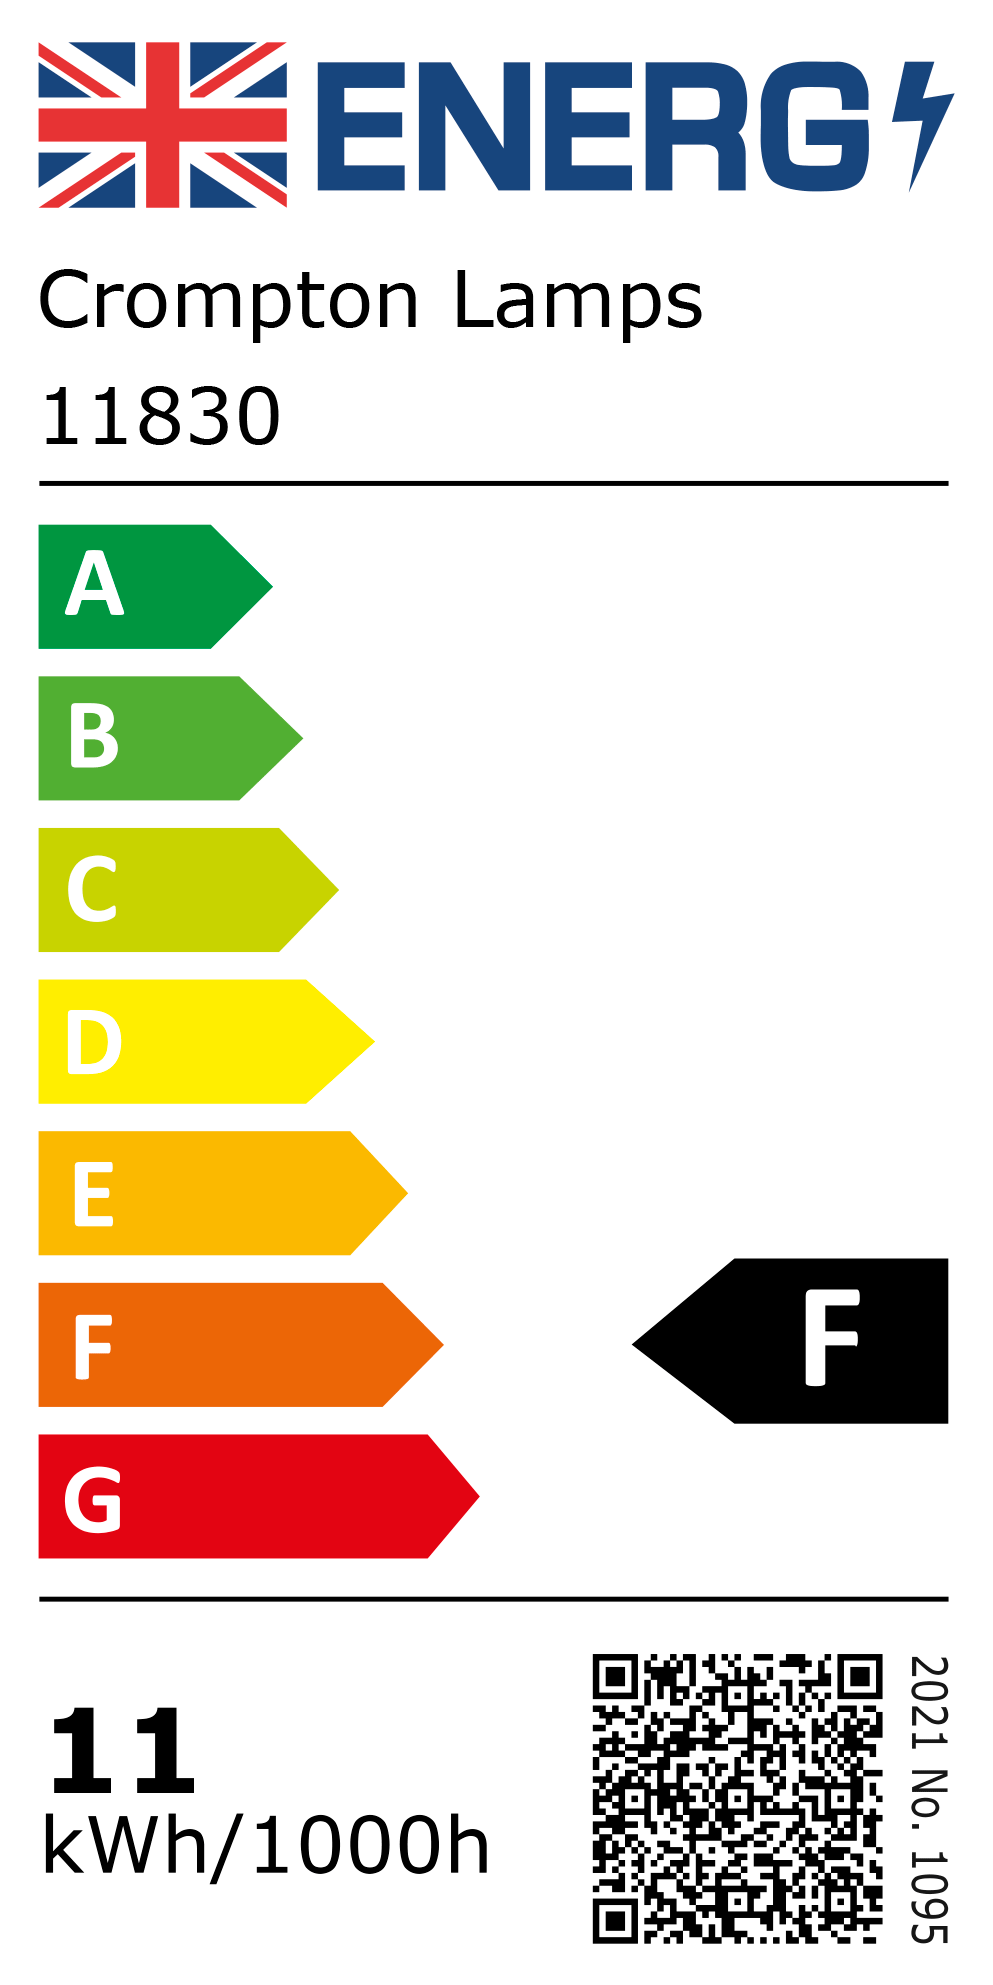 New 2021 Energy Rating Label: Stock Code 11830